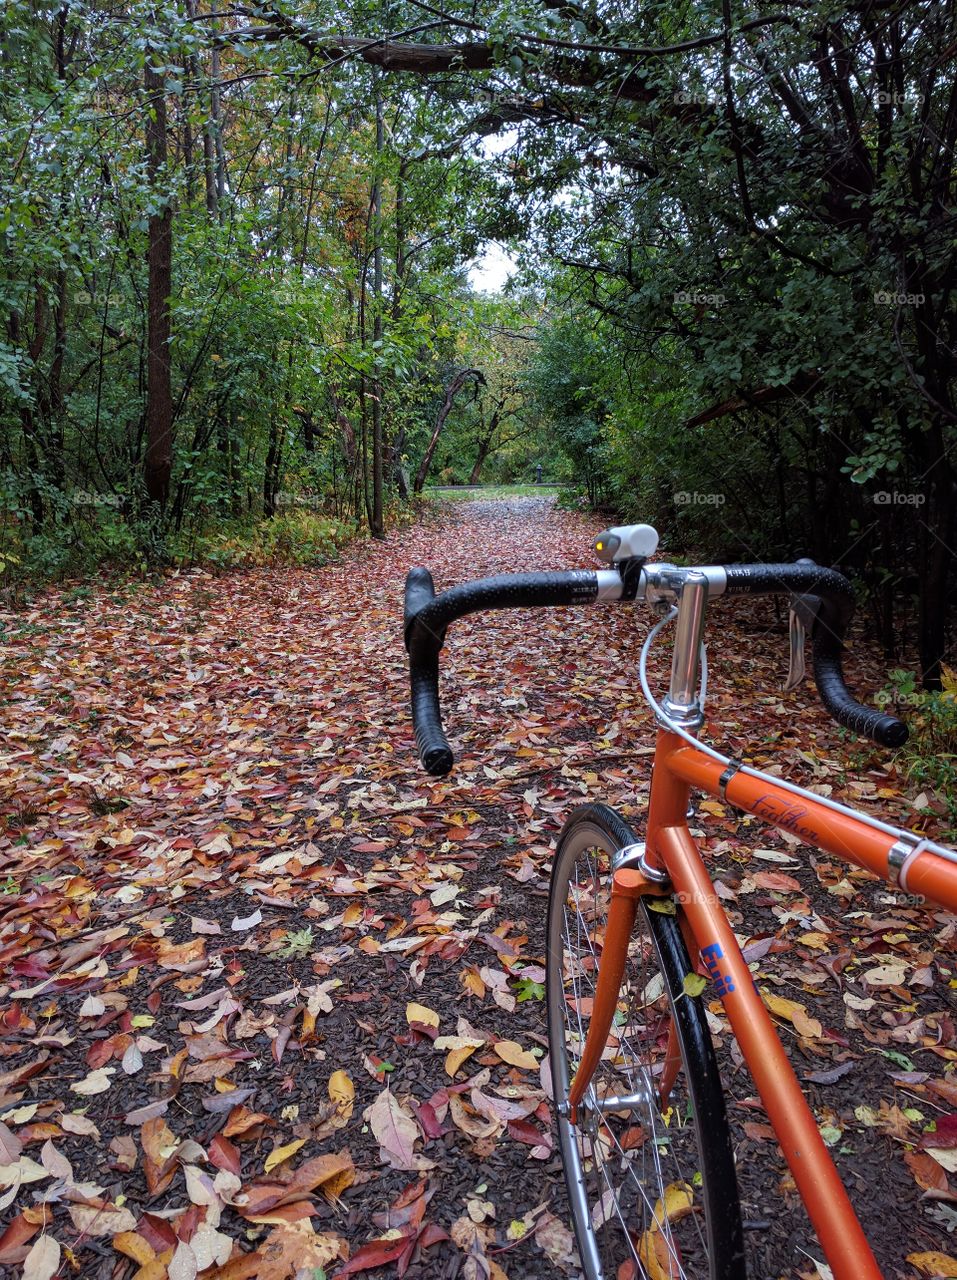 Bike path covered with leaves